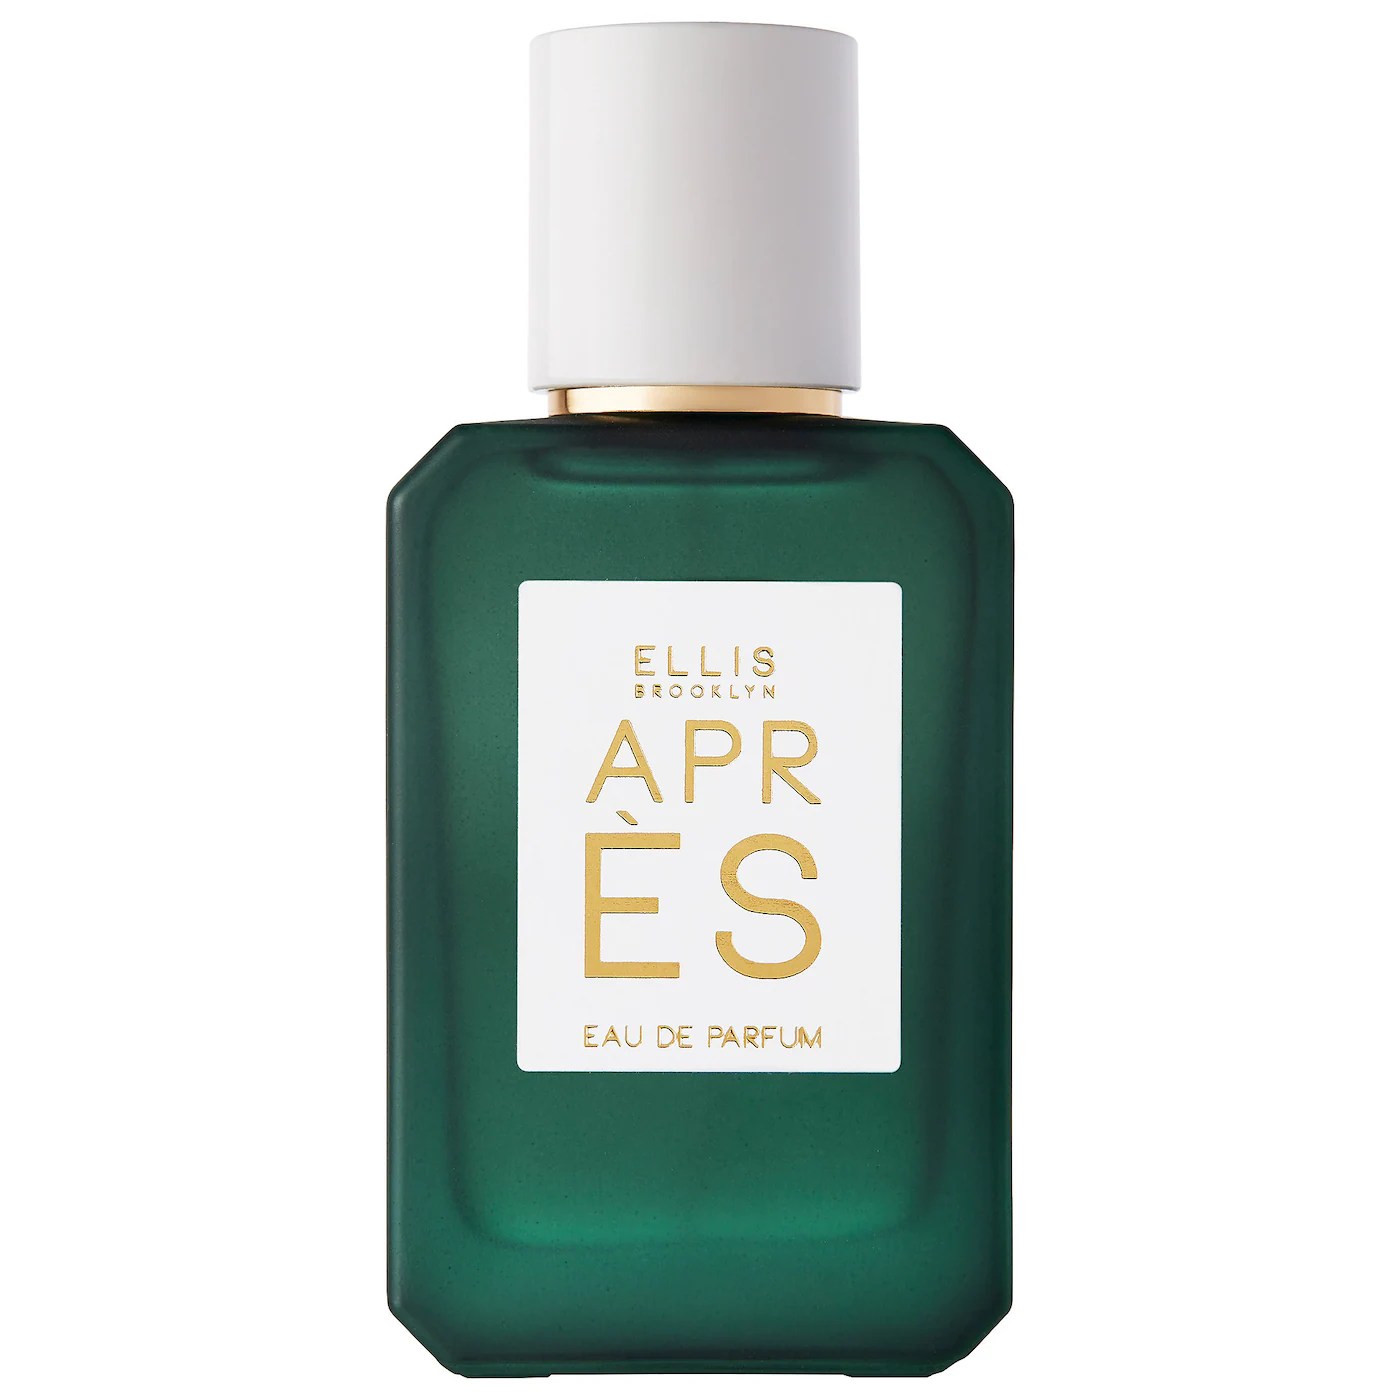 ellis brooklyn apres perfume, a vacation scent, on a white background